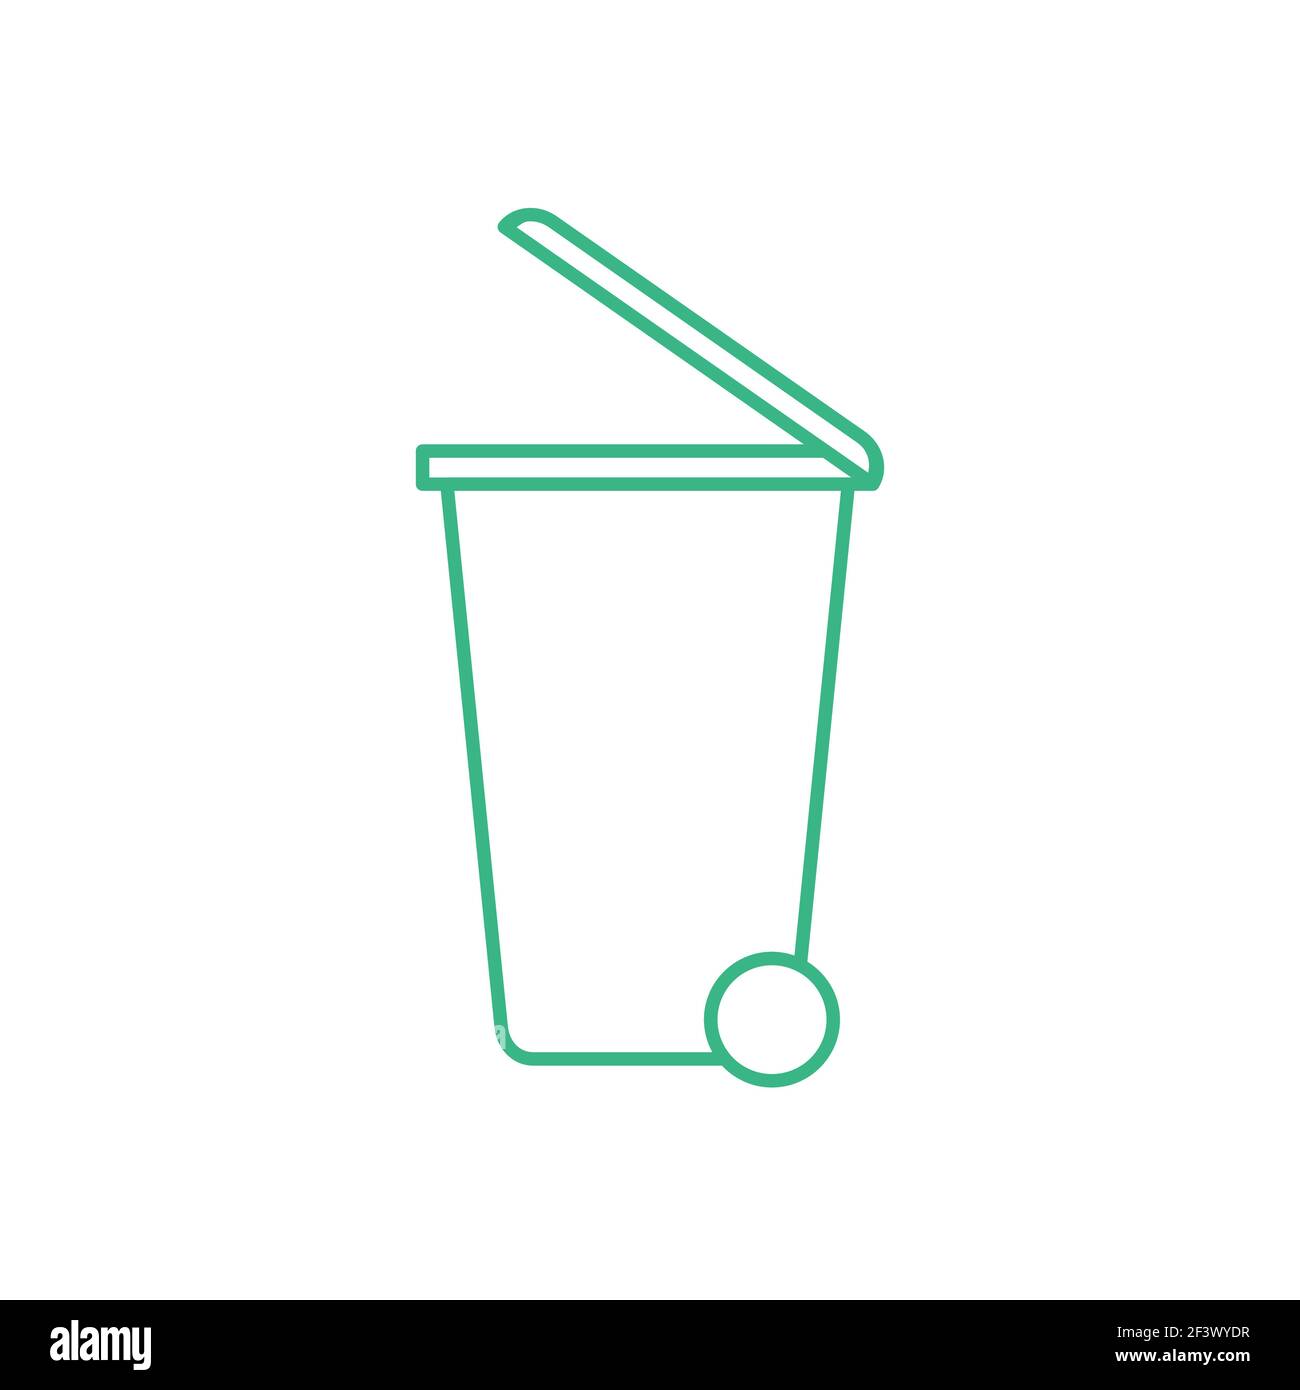 Green garbage bin line icon. Simple recycle bin symbol. Wheeled plastic trash can. Waste basket, dustbin on wheels contour. Waste management concept. Stock Vector